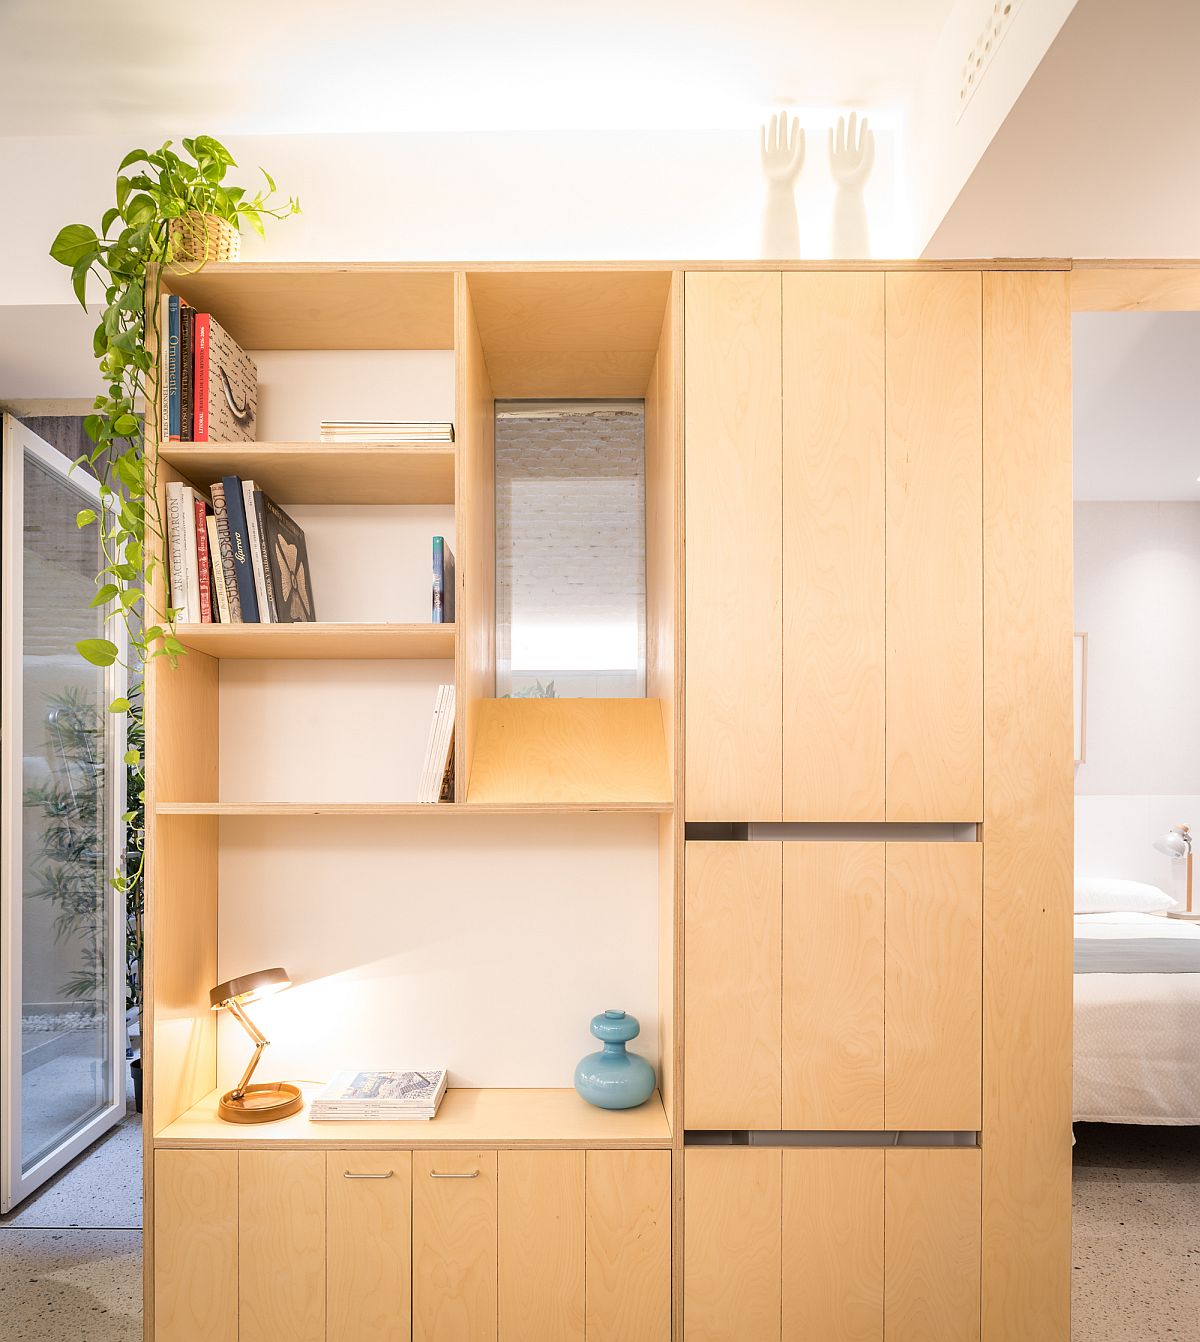 Birch plywood decor throughout the apartments add warmth to an otherwise neutral space